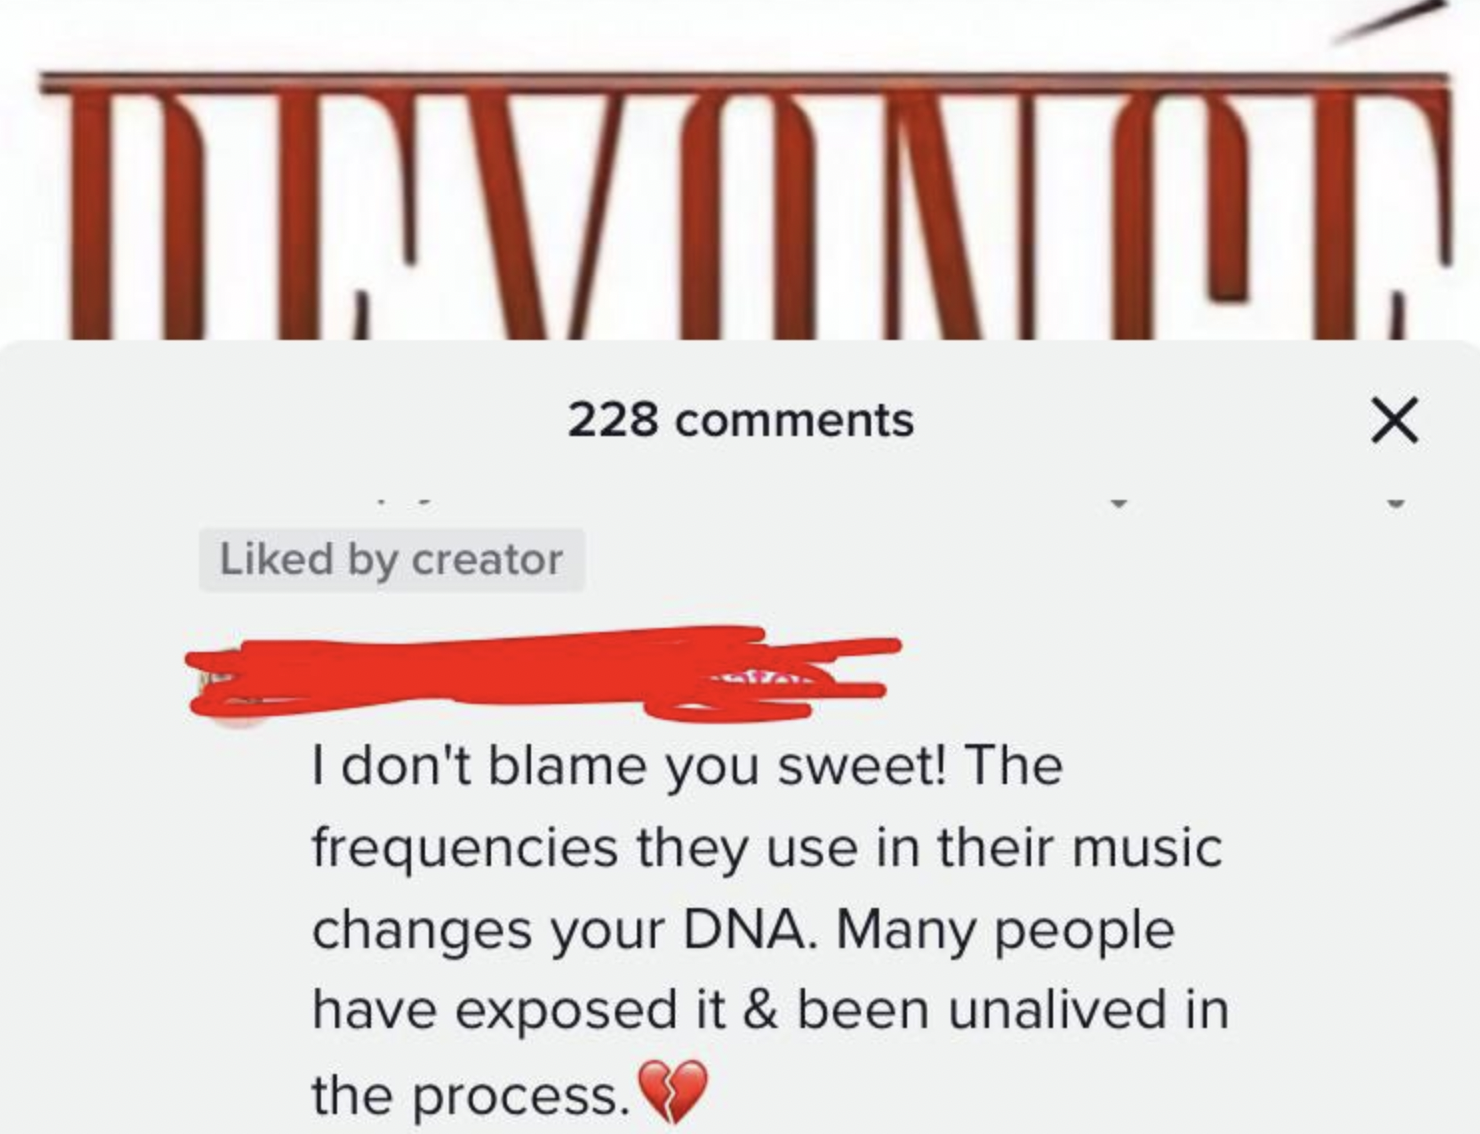 Crazy People of Facebook - by creator I don't blame you sweet! The frequencies they use in their music changes. Many people have exposed it & been unalived in the process.